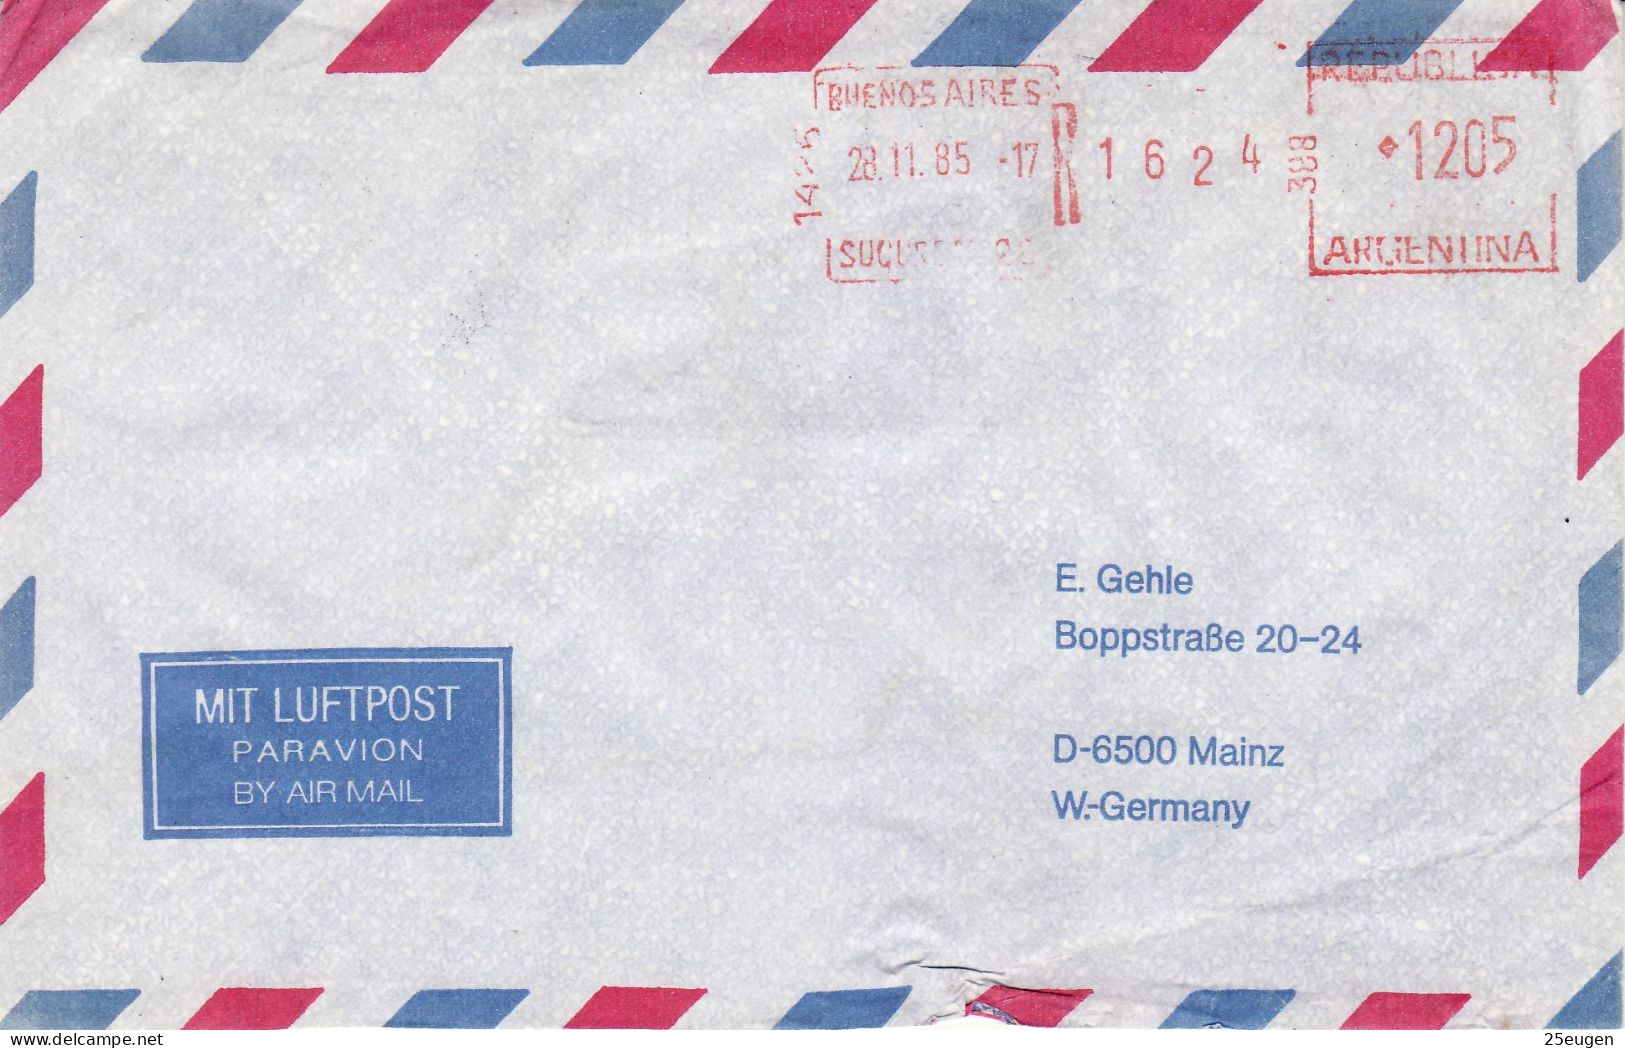 ARGENTINA 1985  AIRMAIL LETTER SENT FROM BUENOS AIRES TO MAINZ - Covers & Documents